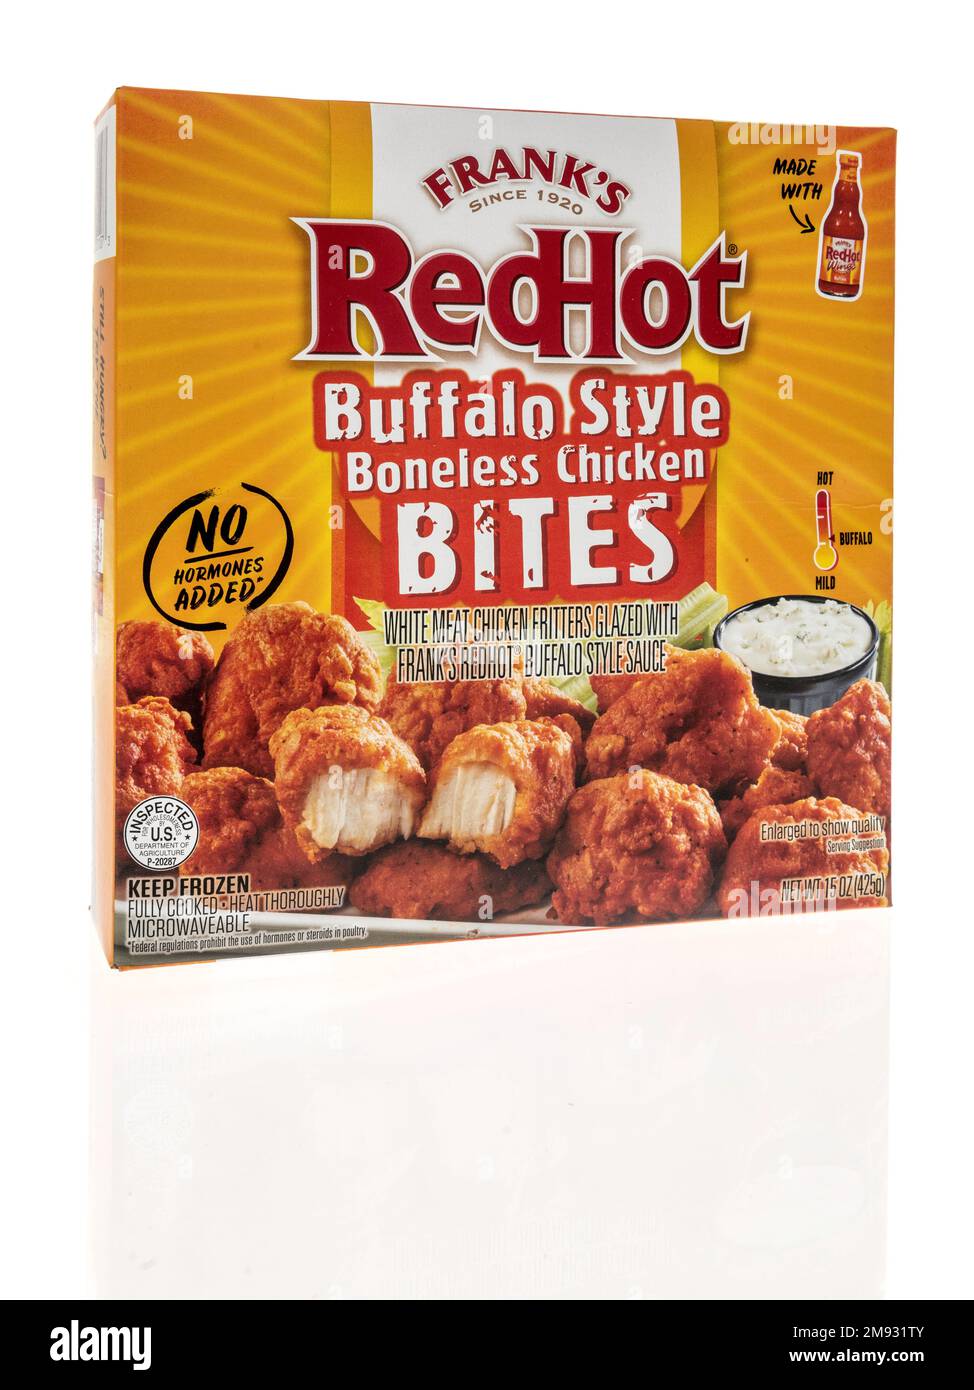 Winneconne, WI - 5 January 2023: A package of Franks redhot buffalo style boneless chicken bites on an isolated background. Stock Photo